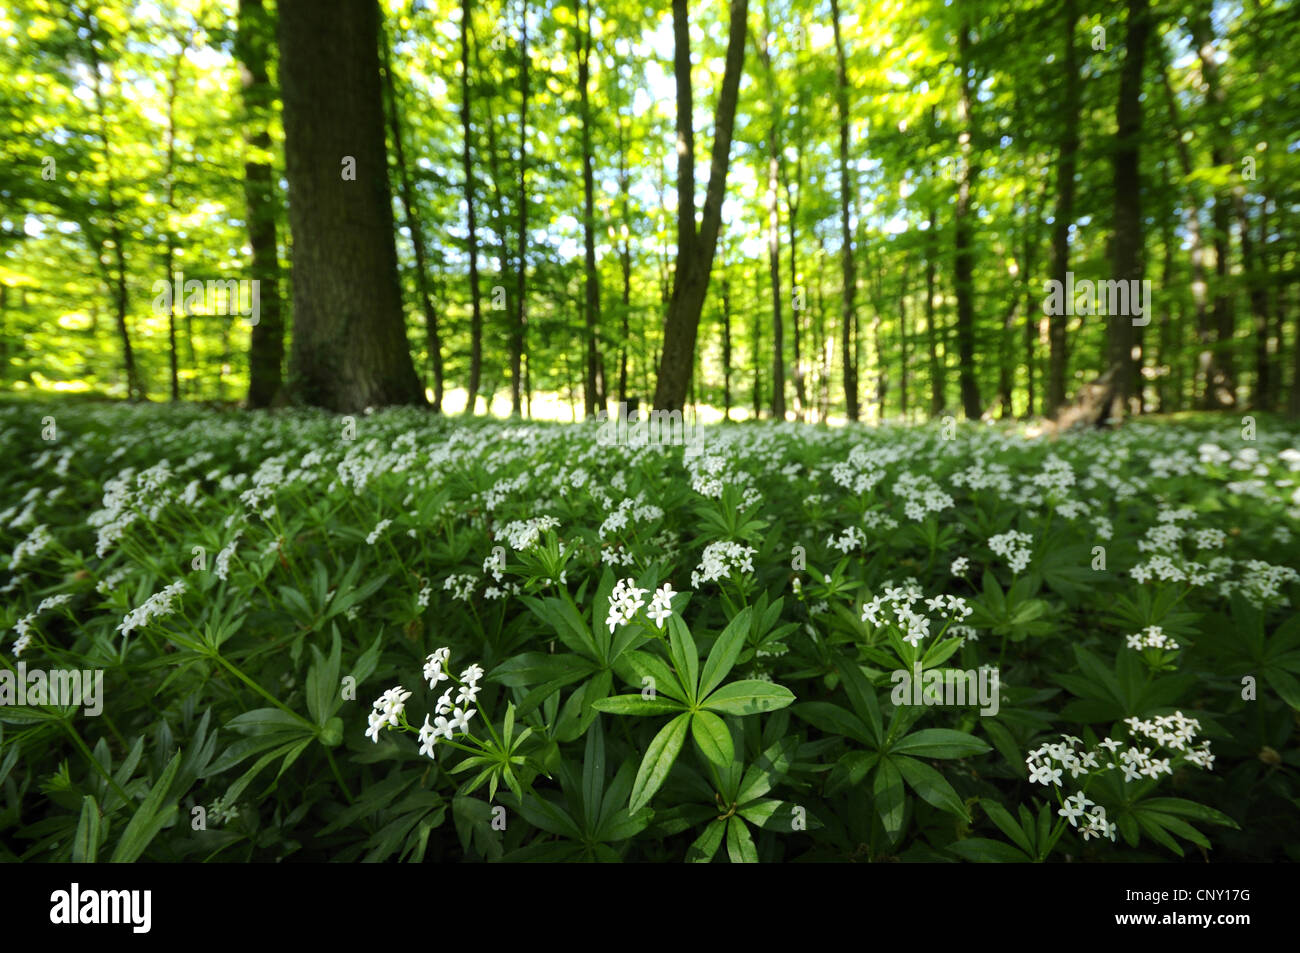 sweet woodruff (Galium odoratum), blooming in a beech forest, Germany Stock Photo